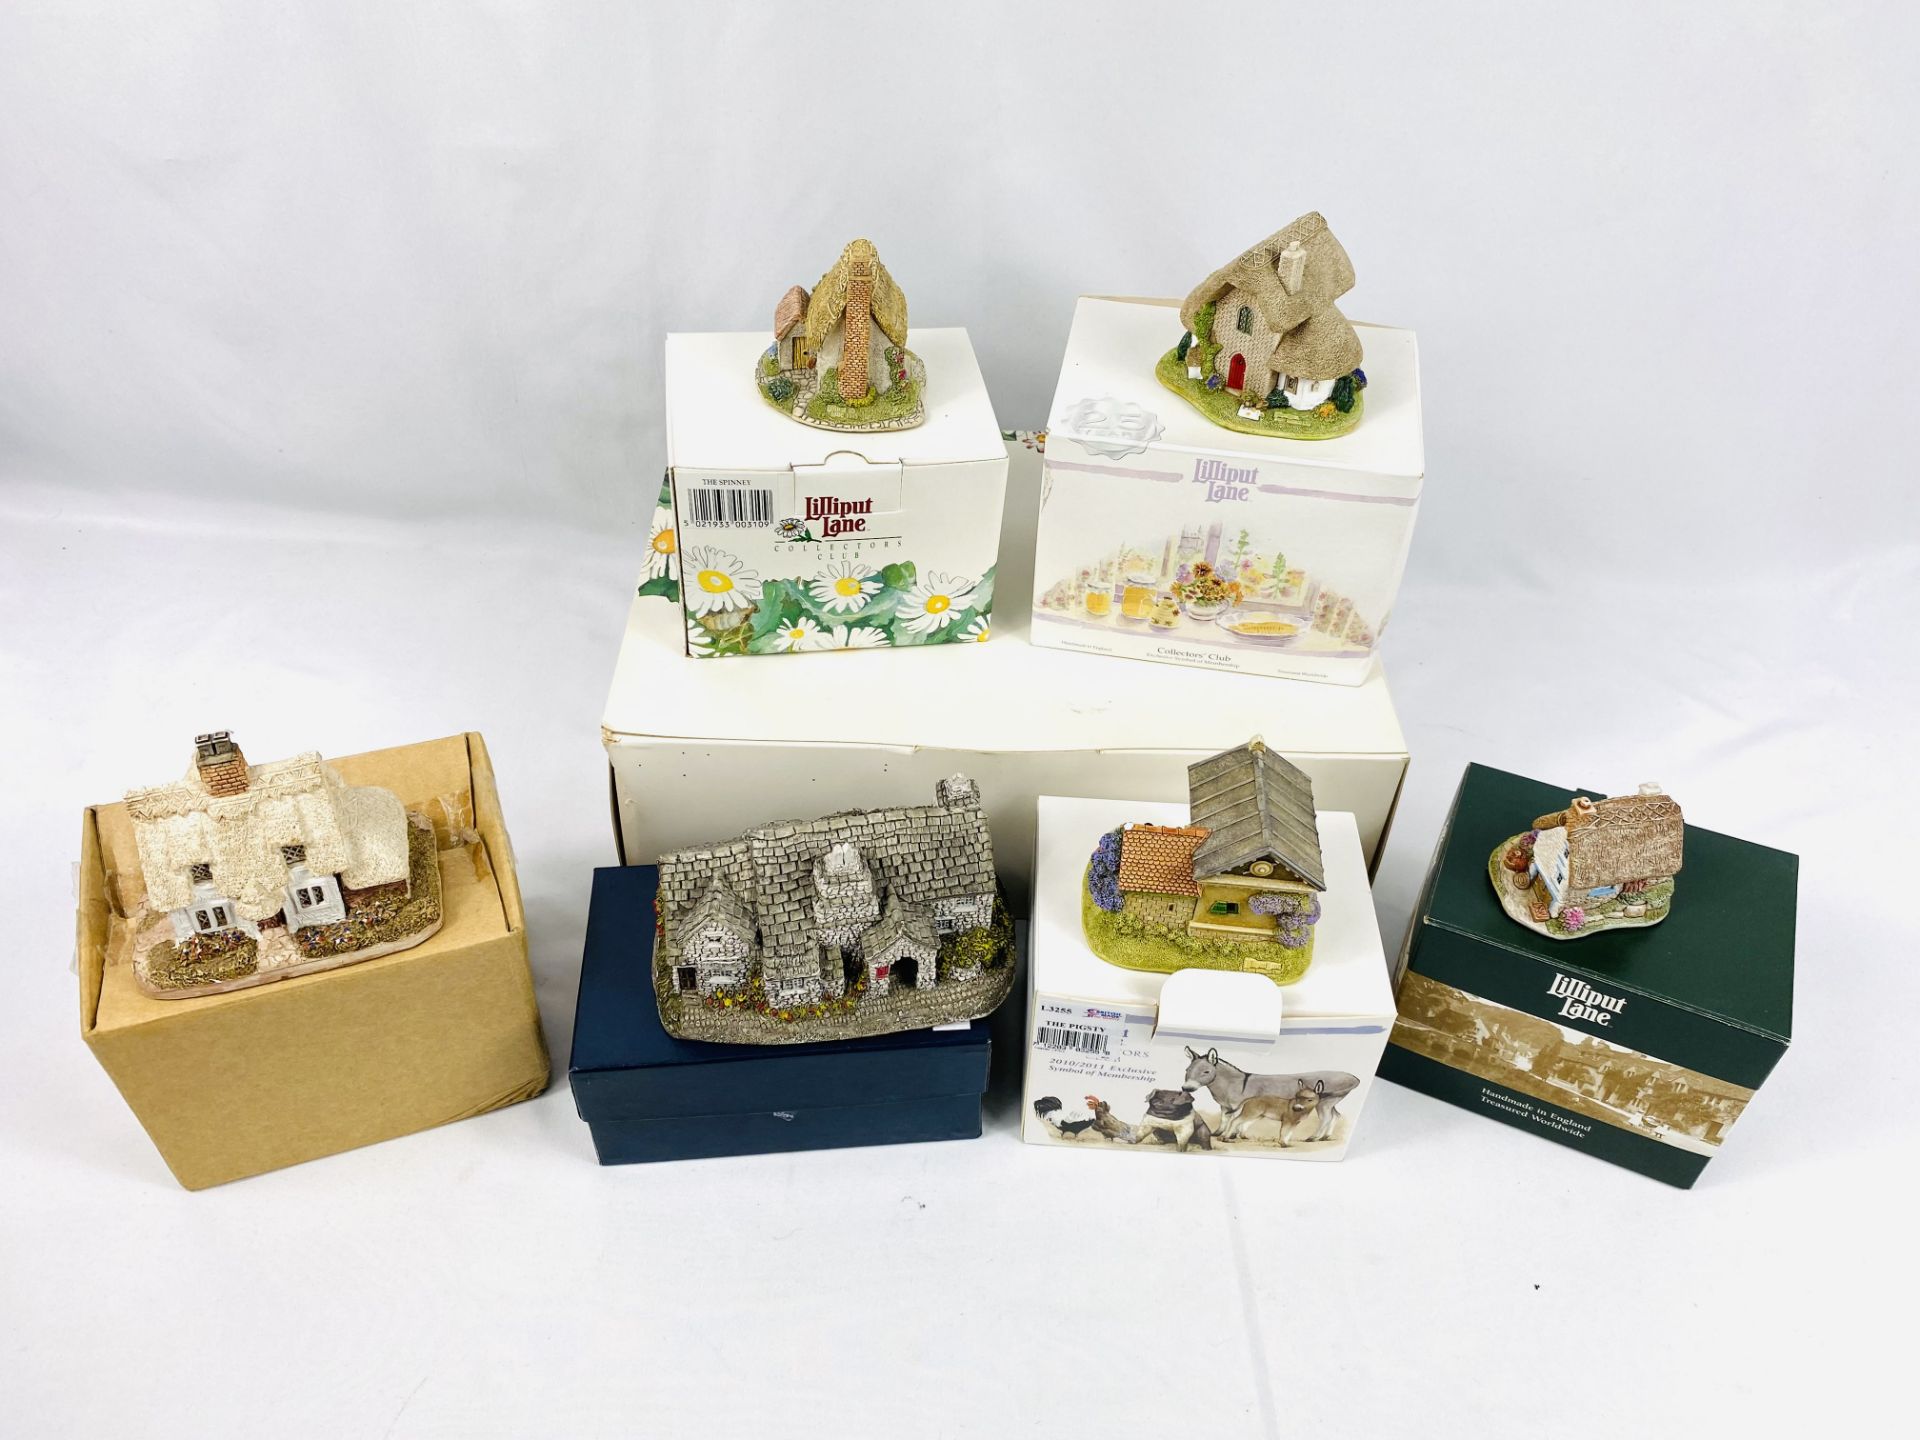 Six Lilliput Lane Cottages in boxes - Image 2 of 4